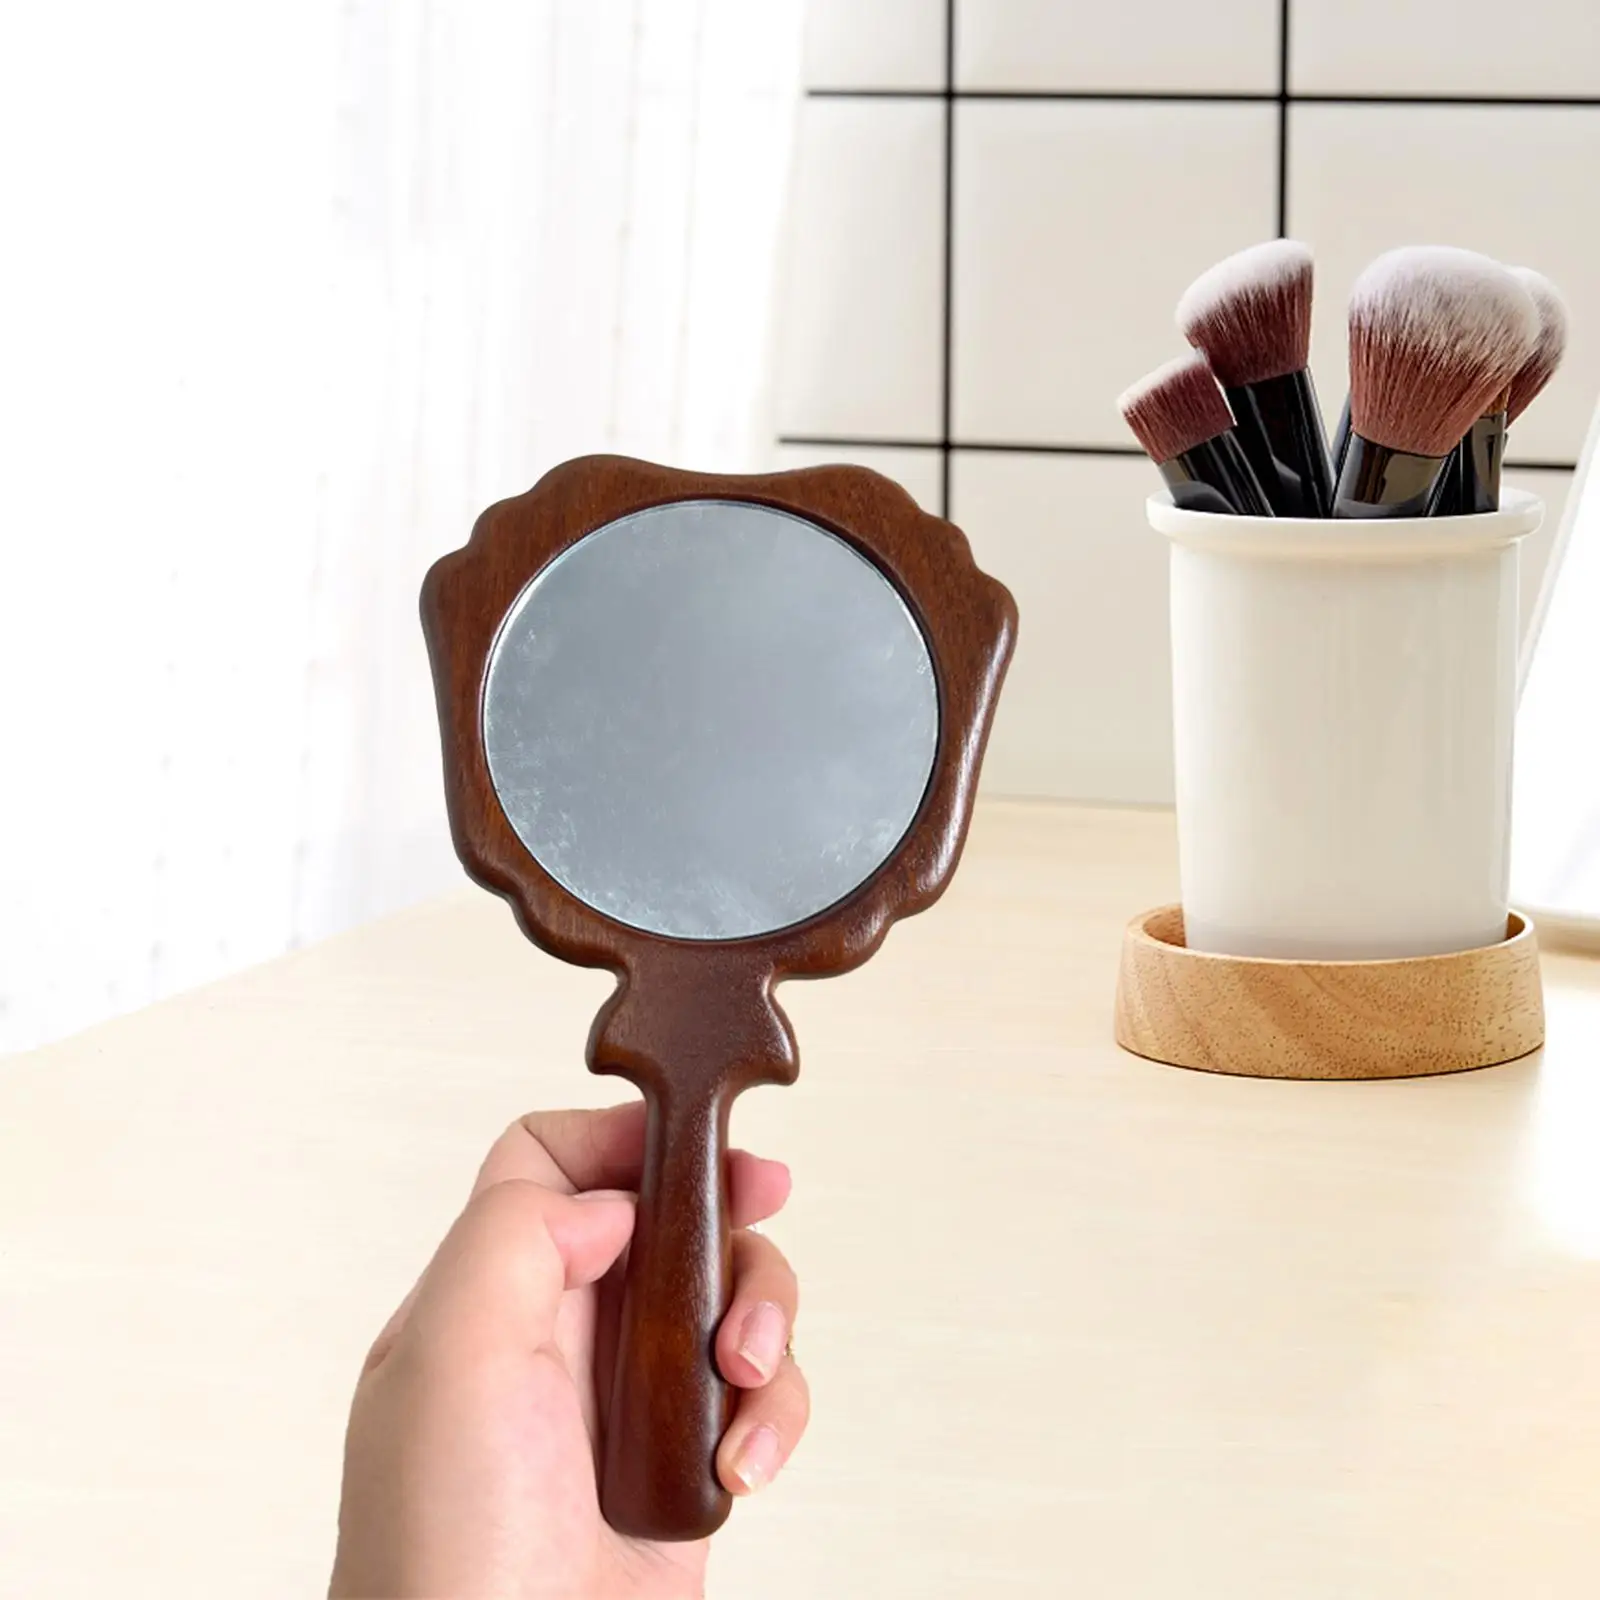 Hand Mirror Retro for Girl Handheld Mirror Small Vanity Mirror Wood Makeup Mirrors for Salon Hotels Make up Barber Hairdressing